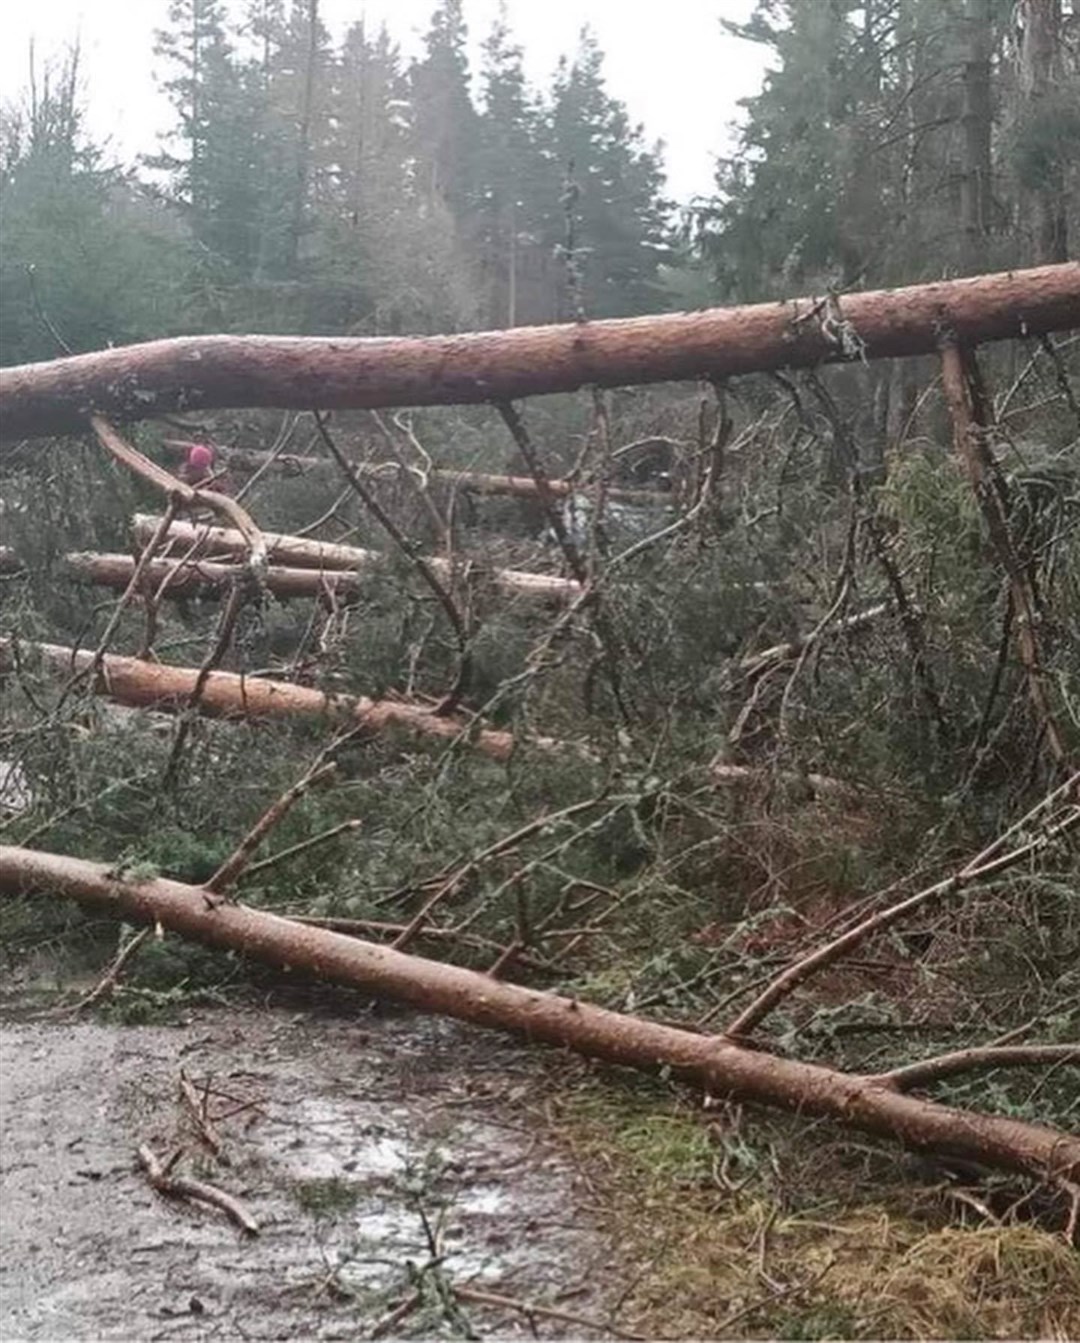 Several areas in the strath have been affected by fallen trees in the latest storm